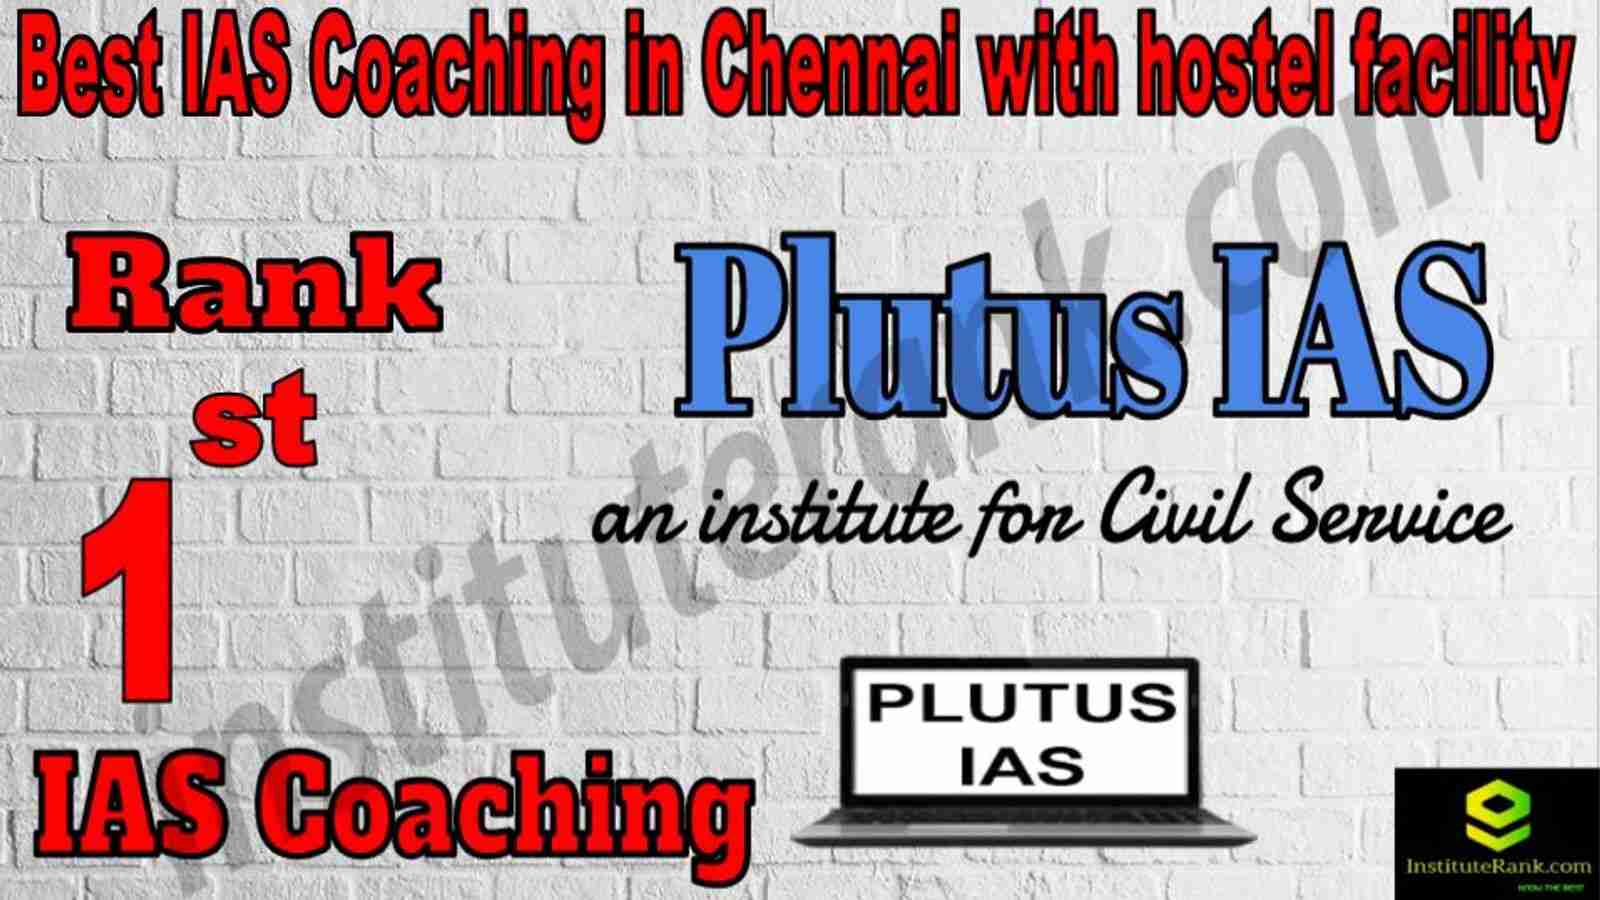 1st Best IAS Coaching in Chennai with hostel facility